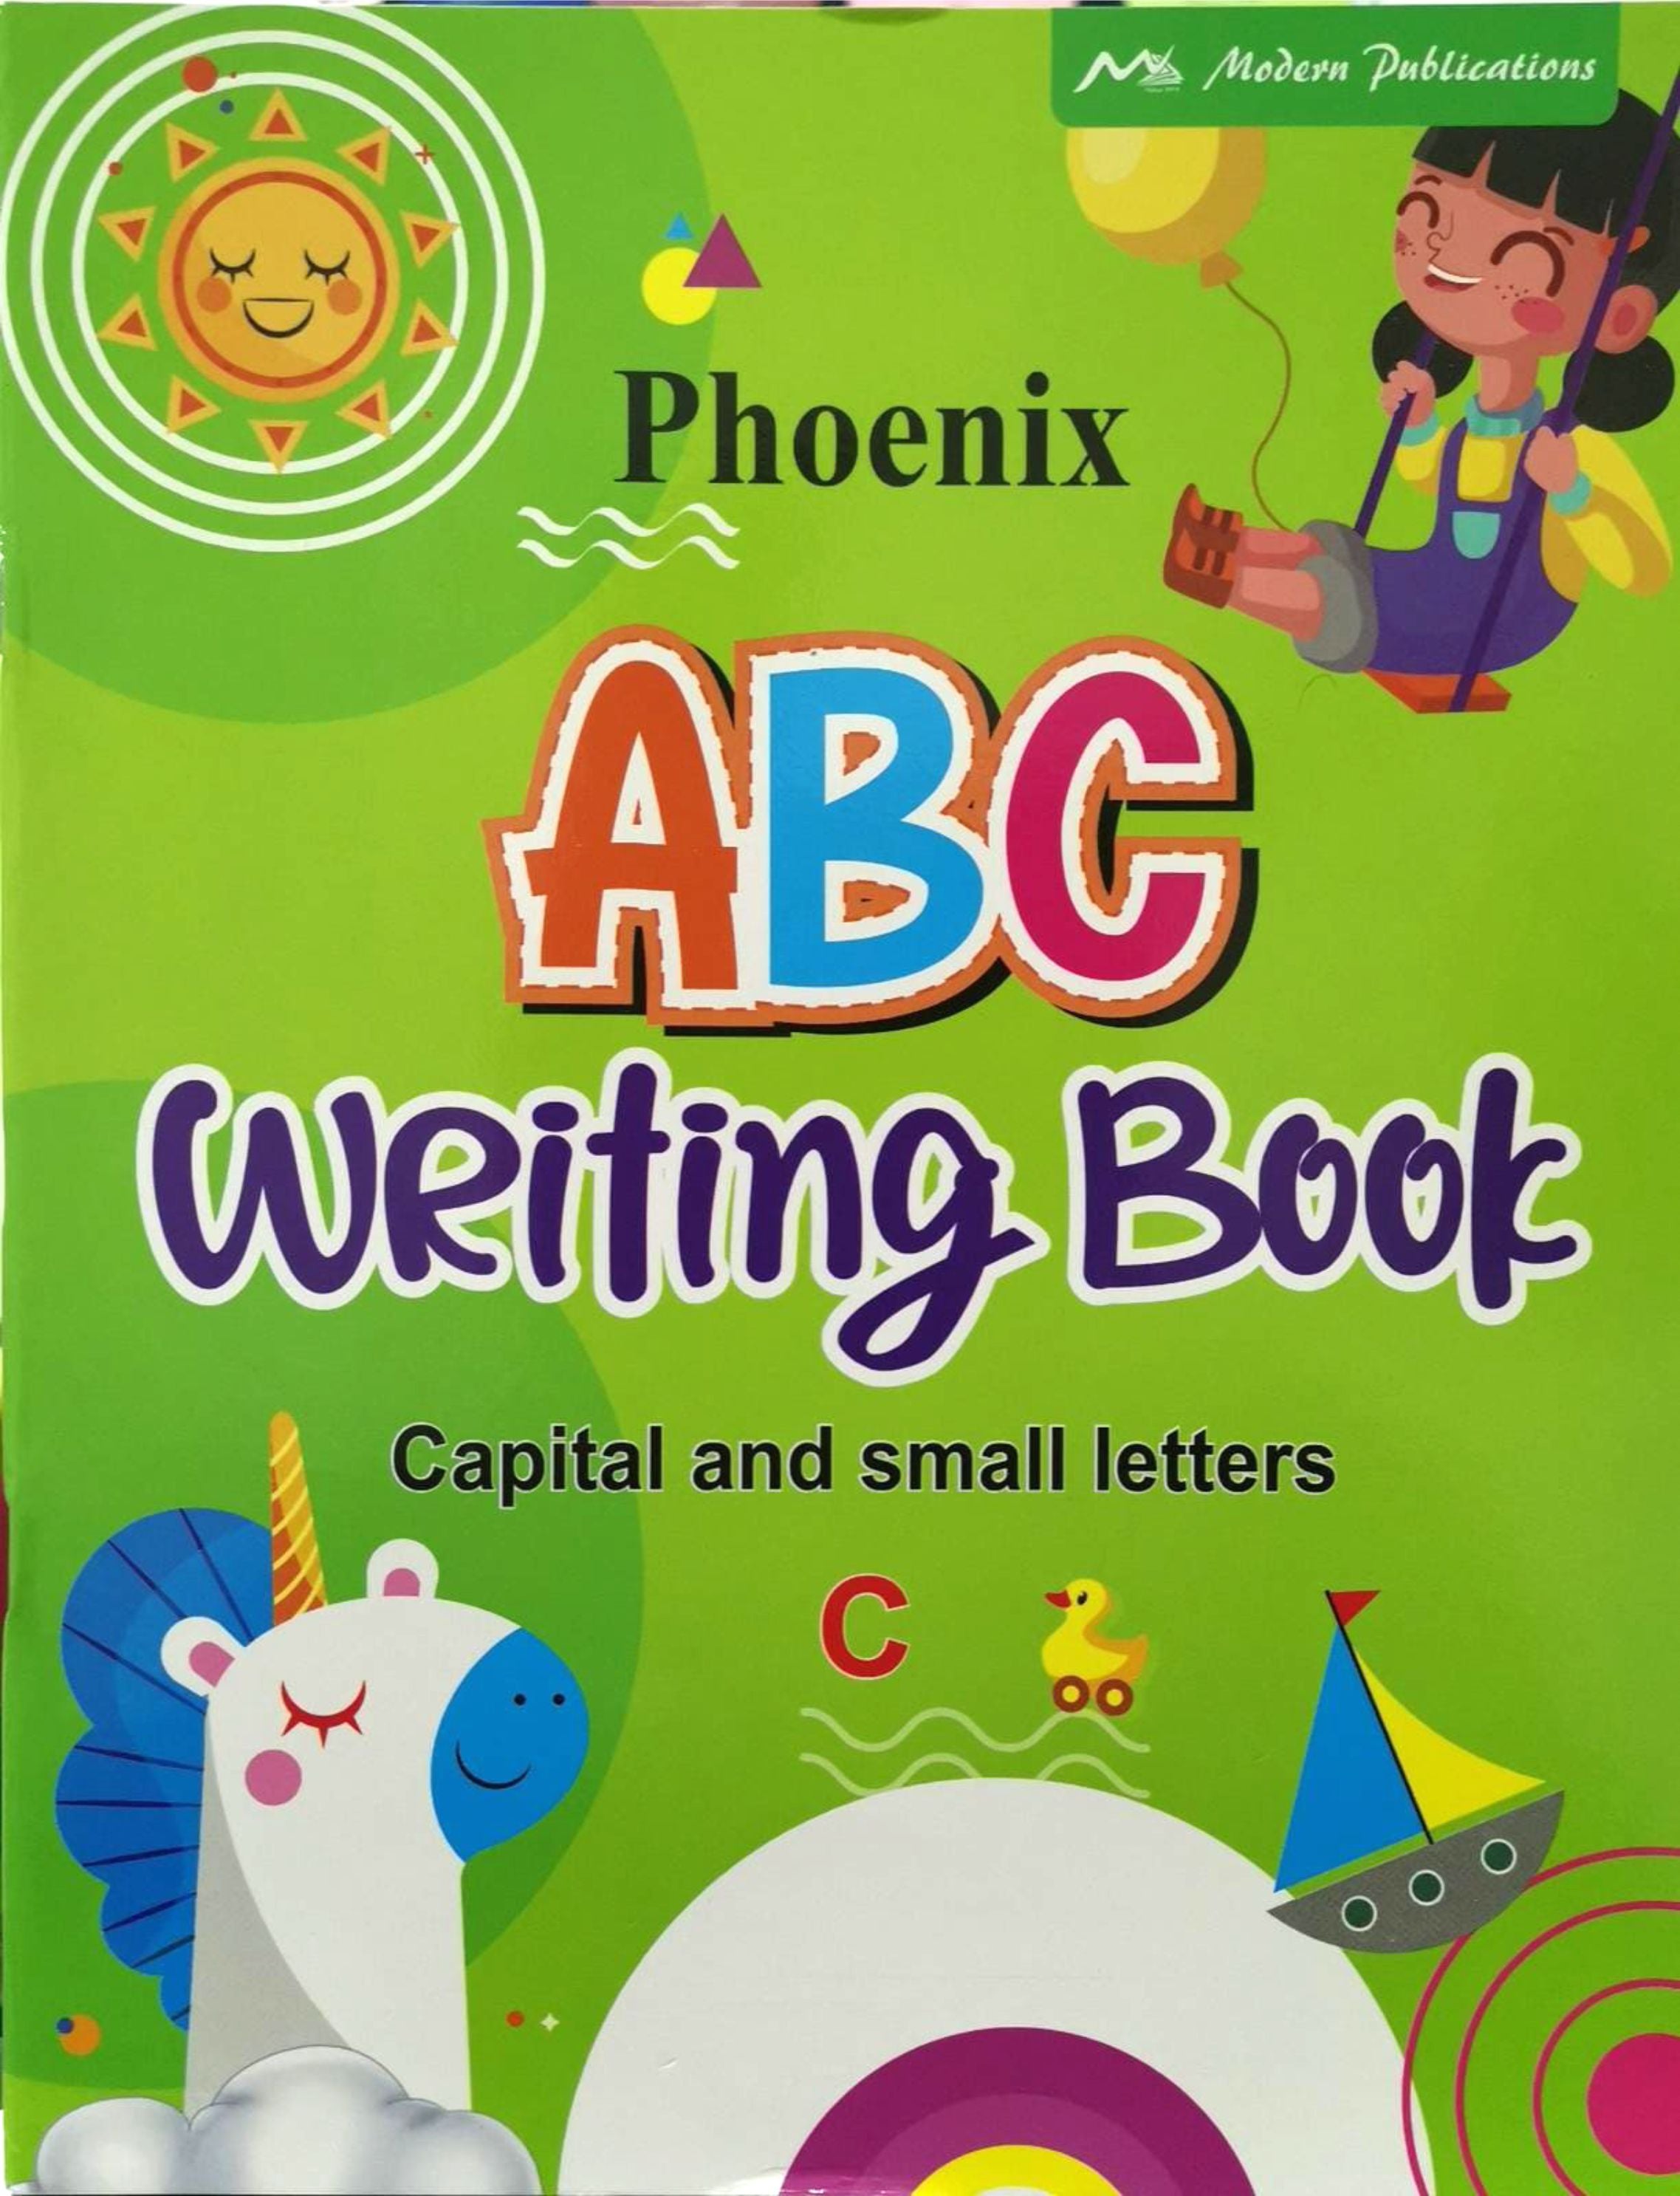 Phoenix ABC Writing Book (Capital and small letters)